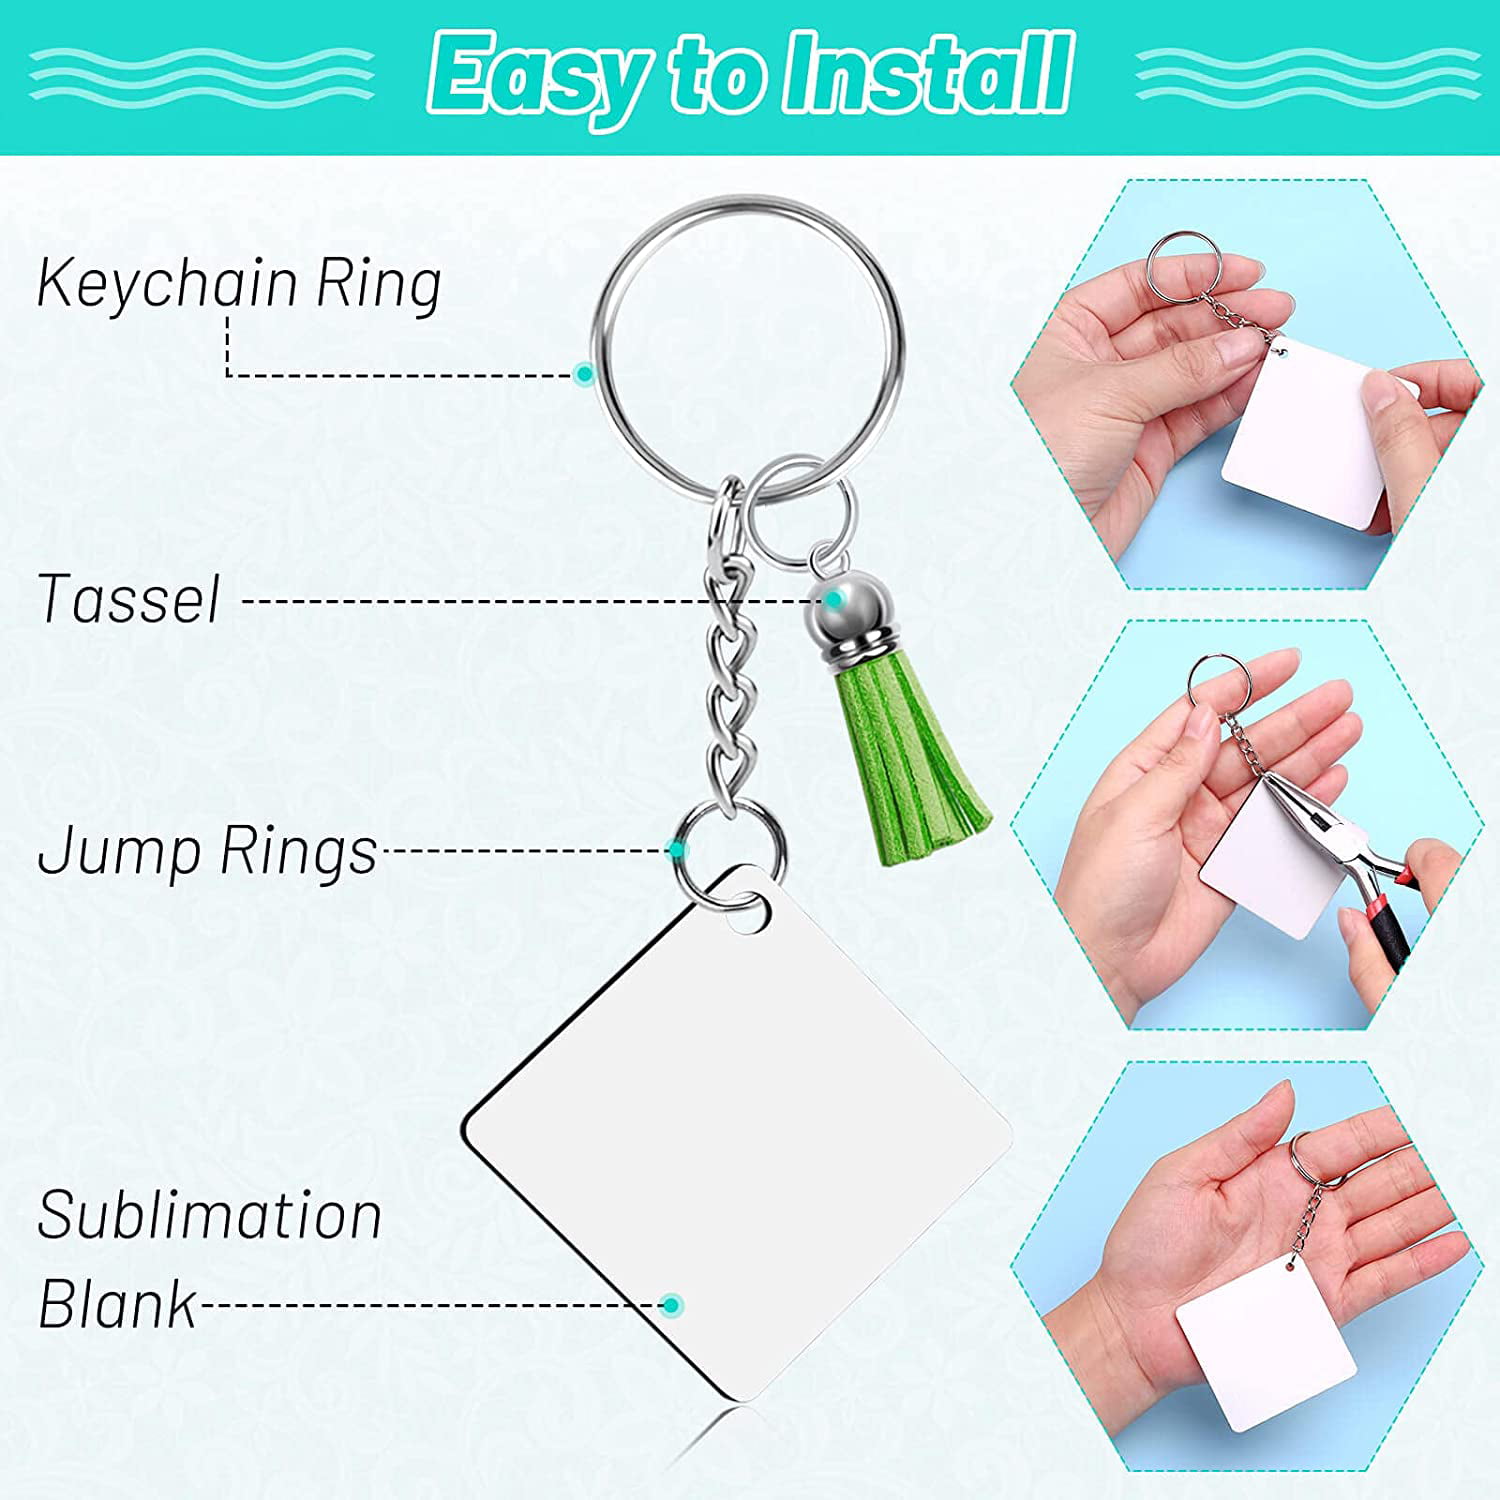 Sublimation Keychain Blanks Bulk Keychain Rings and Jump Rings for DIY Keychain Crafting Tuceyea 120Pcs Sublimation Keychain Blanks Set with Tassels 2inch Rectangle Sublimation Blanks Keychain Circle 